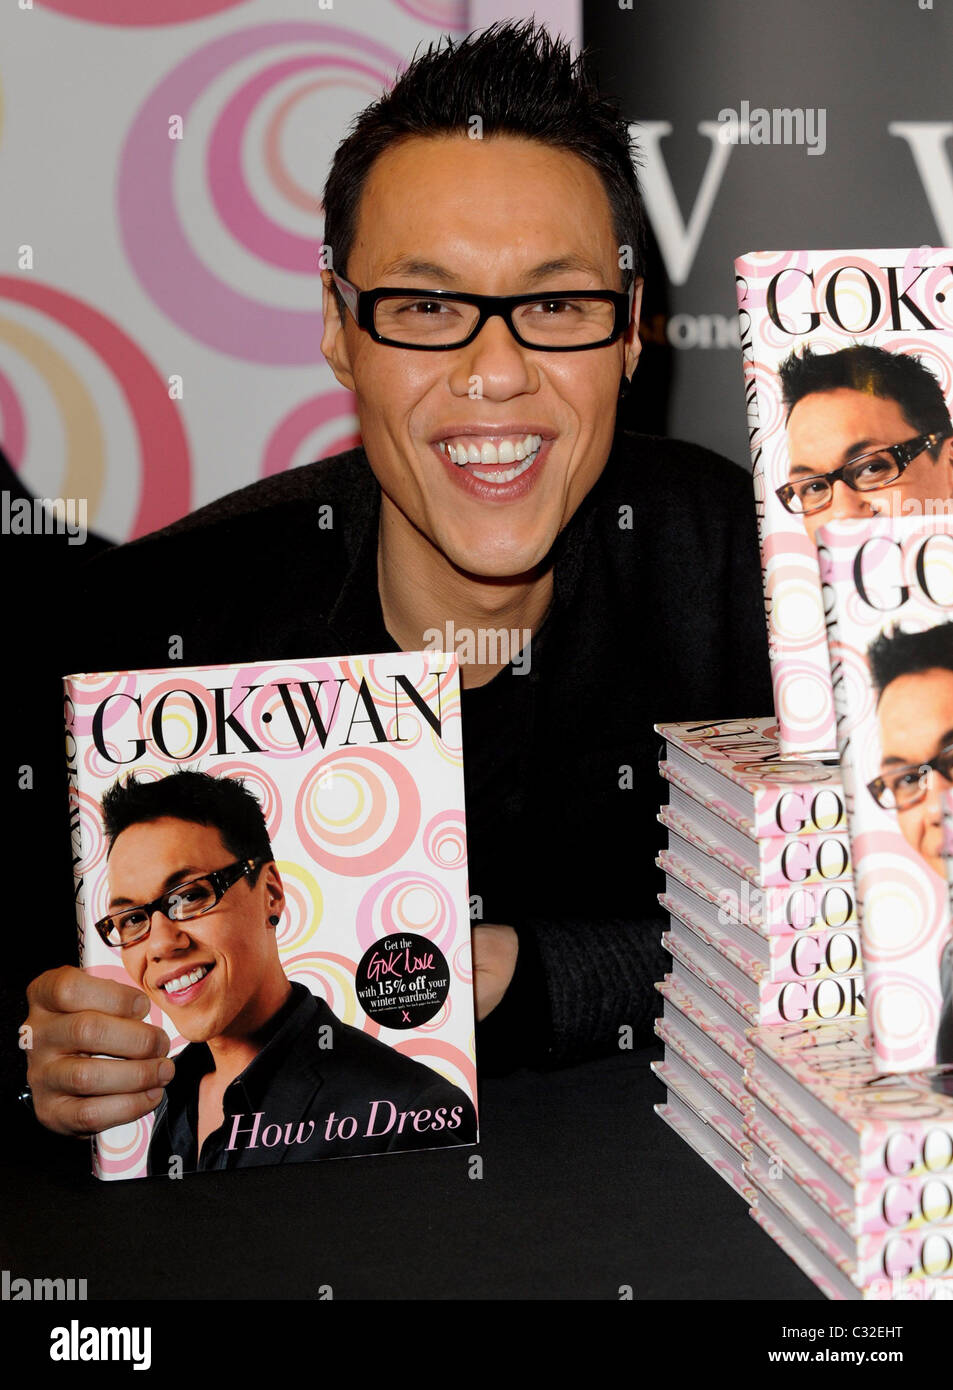 Gok wan signs his new book how to dress hi-res stock photography and images  - Alamy